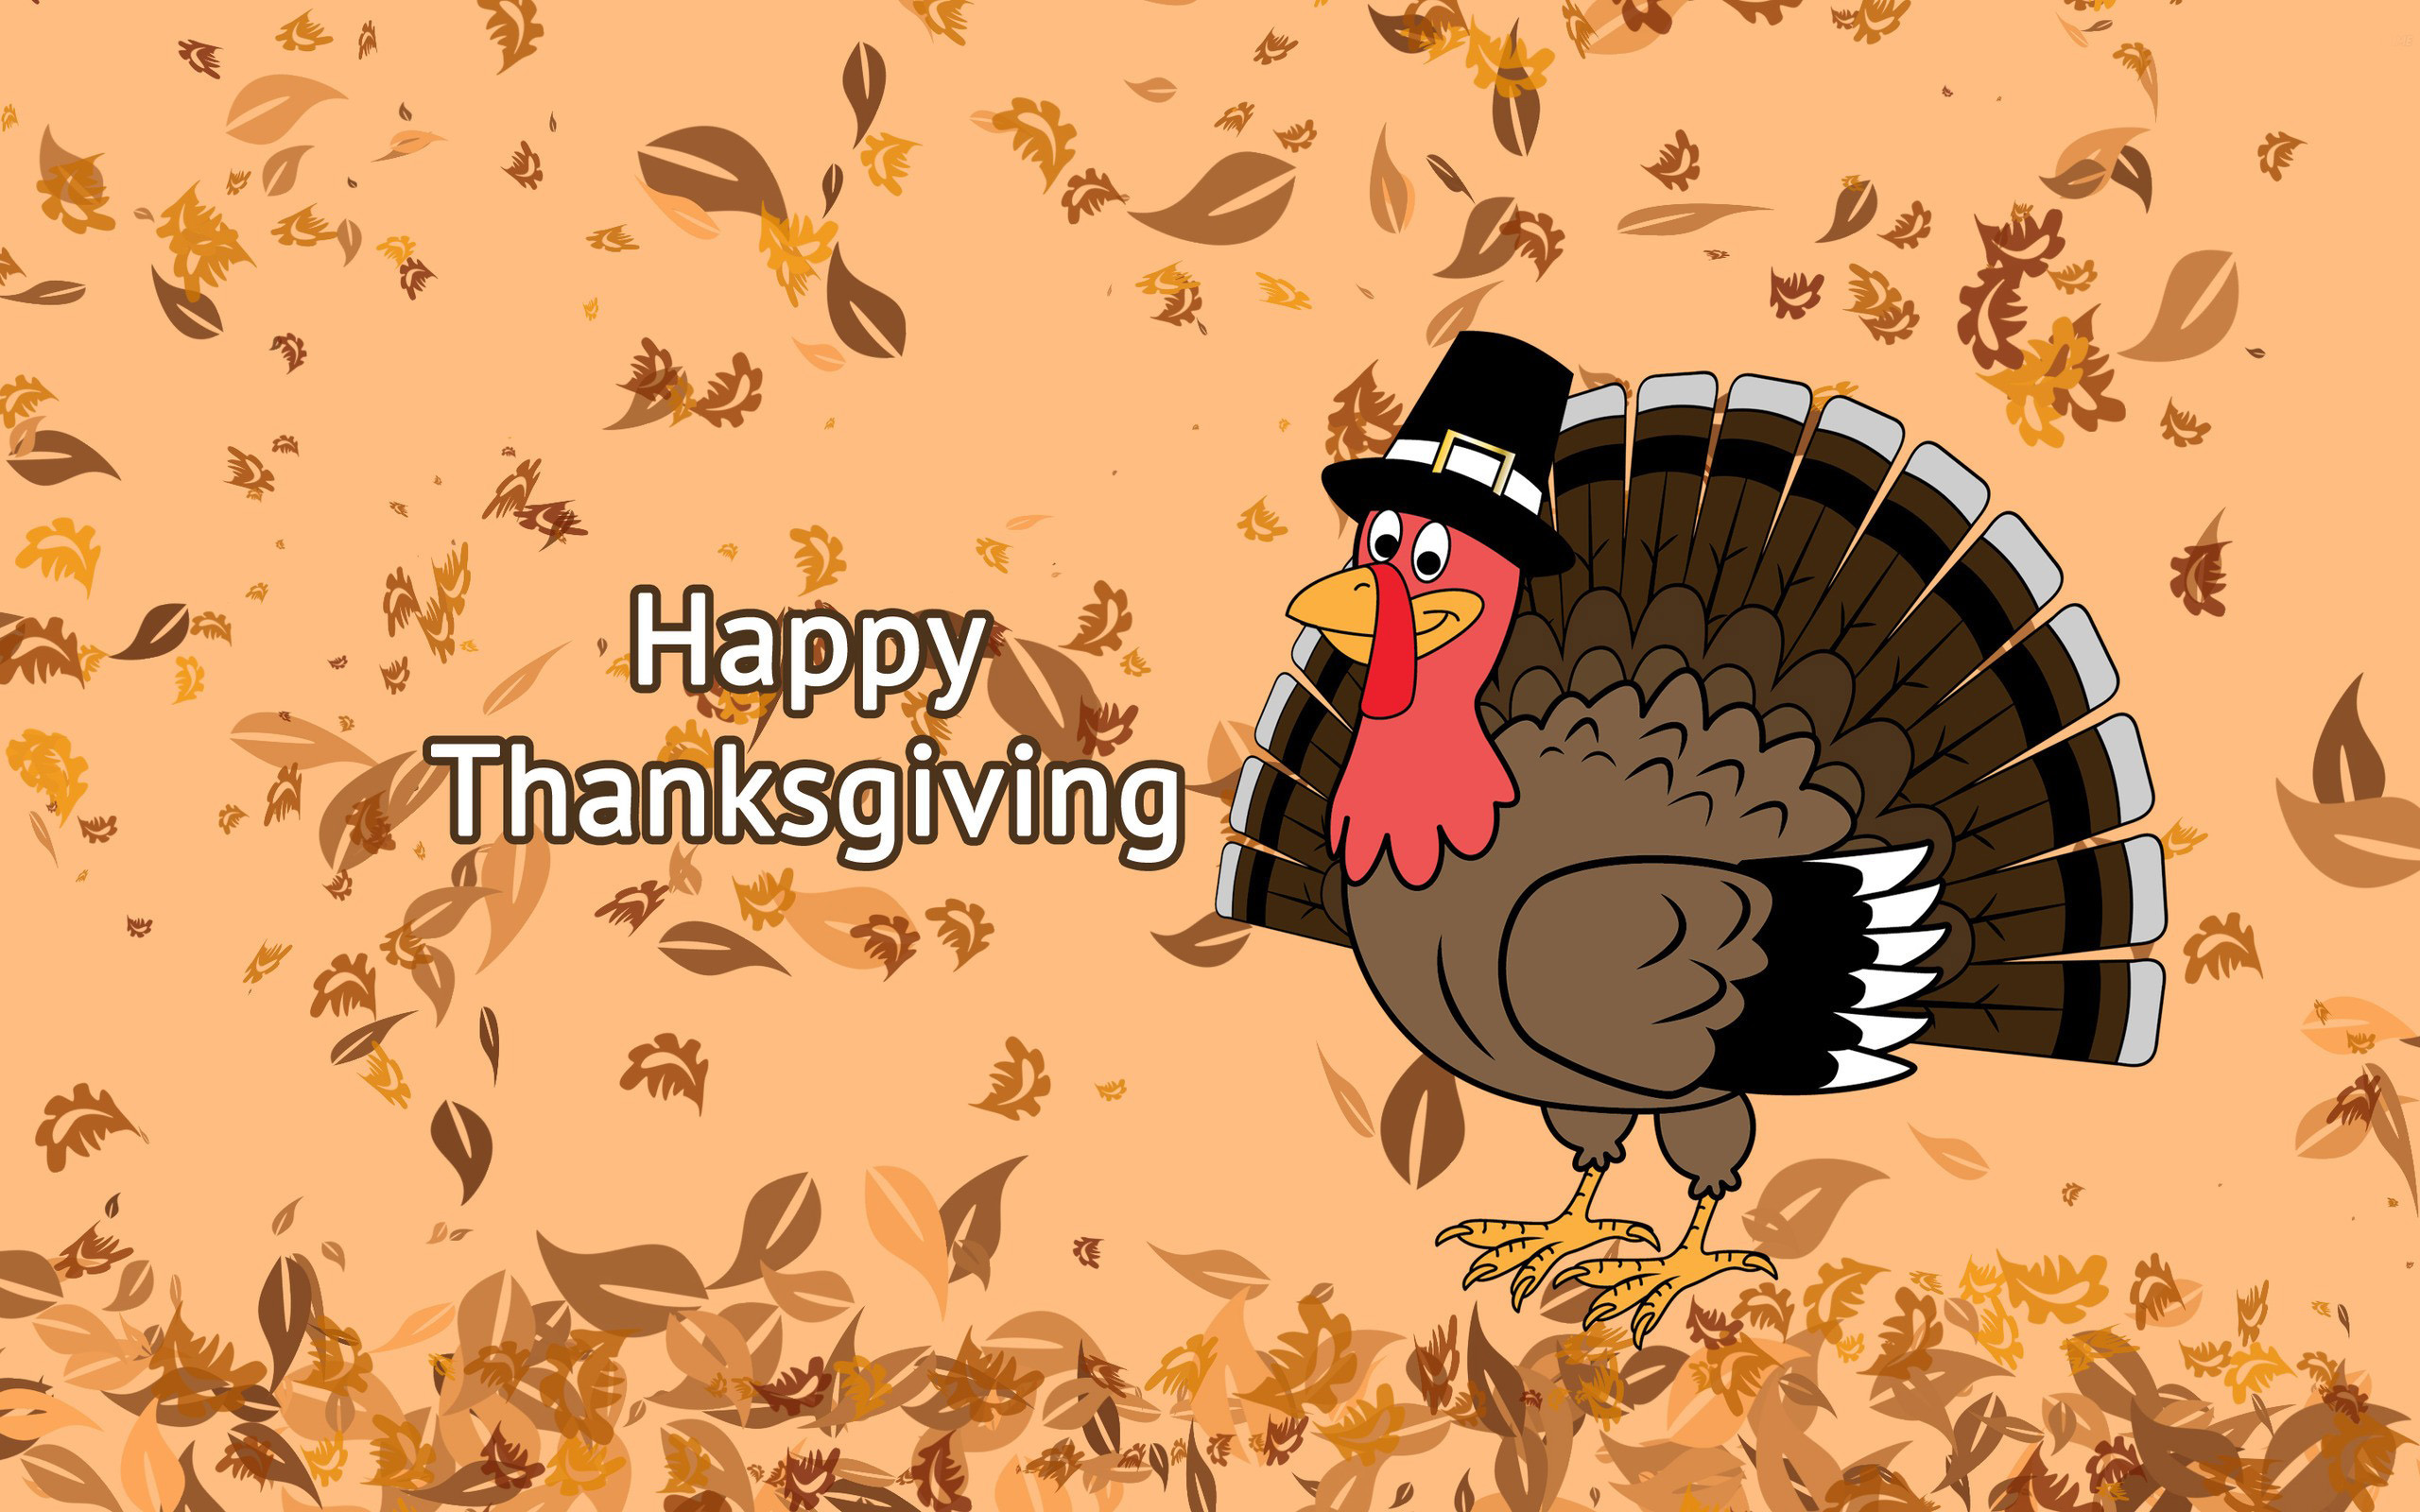 Happy Thanksgiving 2016 Images | Wallpapers, Backgrounds, Images ...